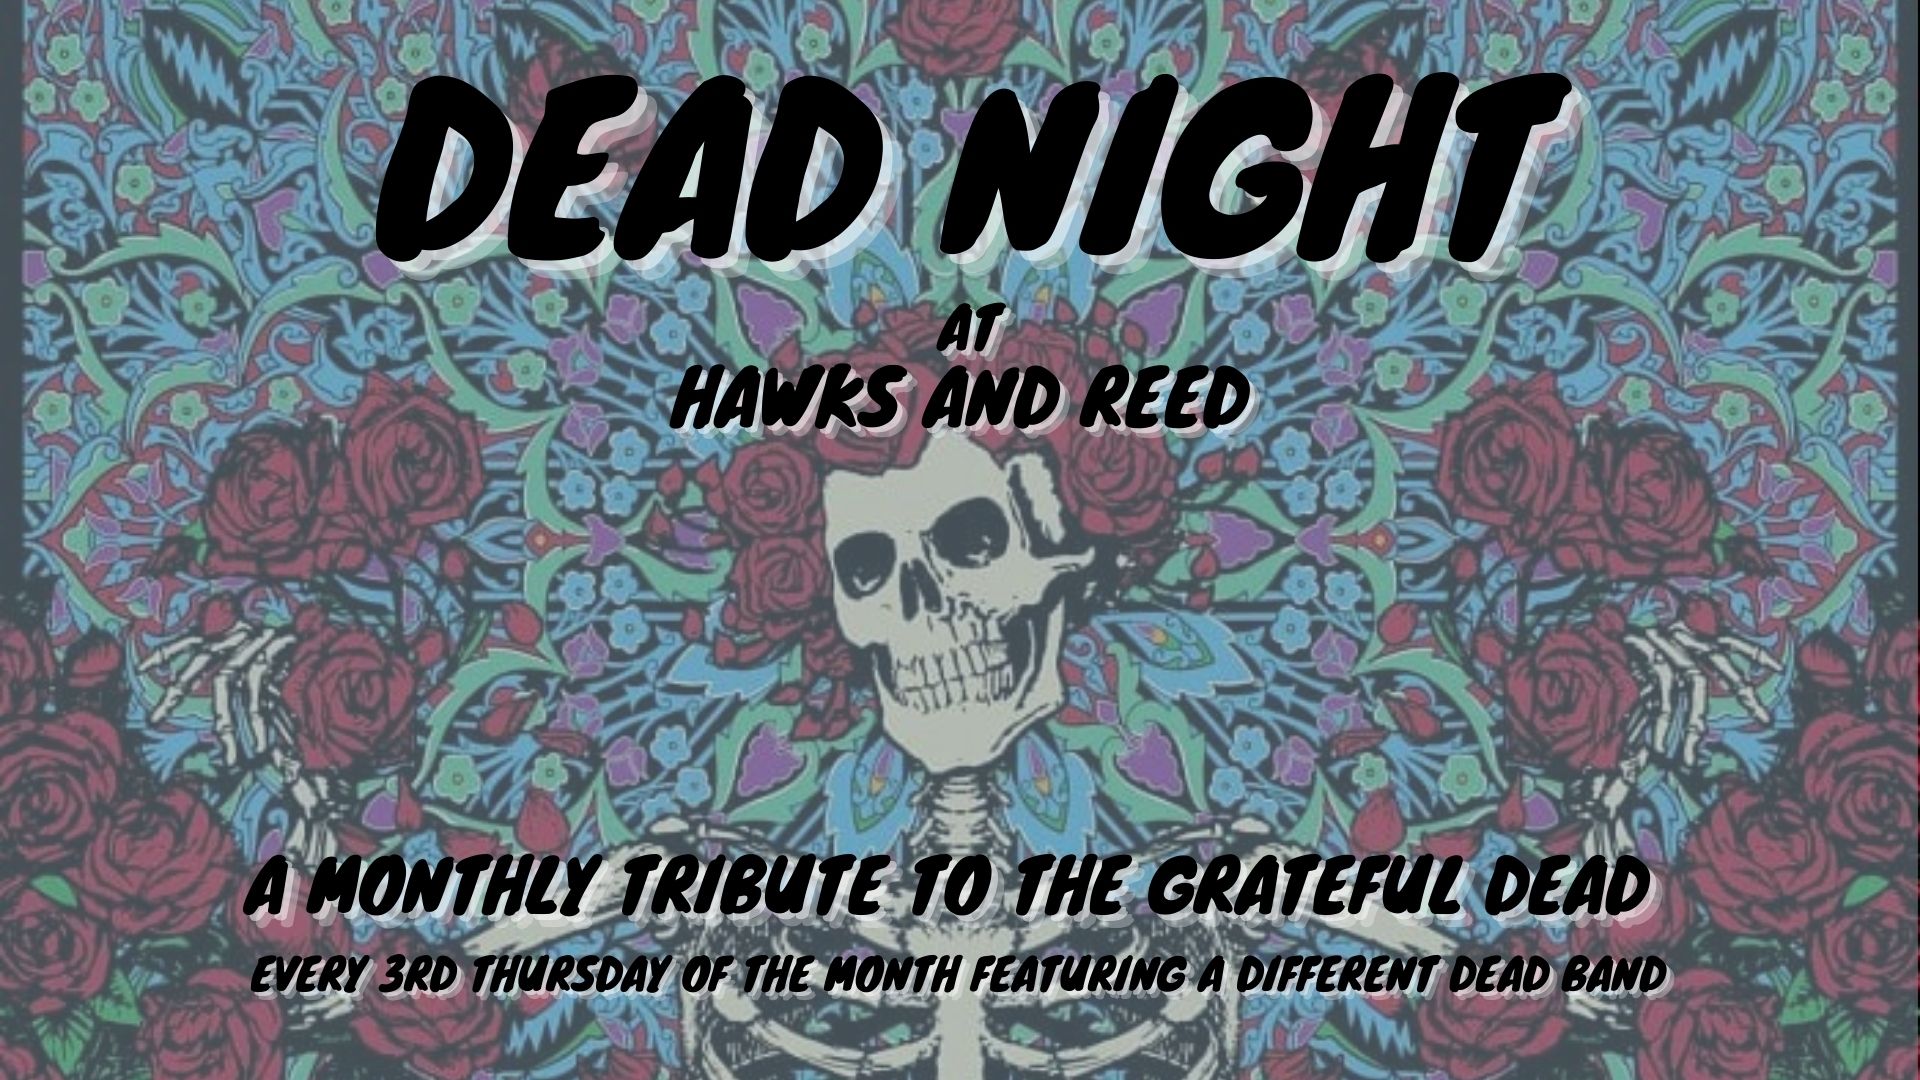 DEAD NIGHT at HAWKS AND REED – Feat. Terrapin Tuesday